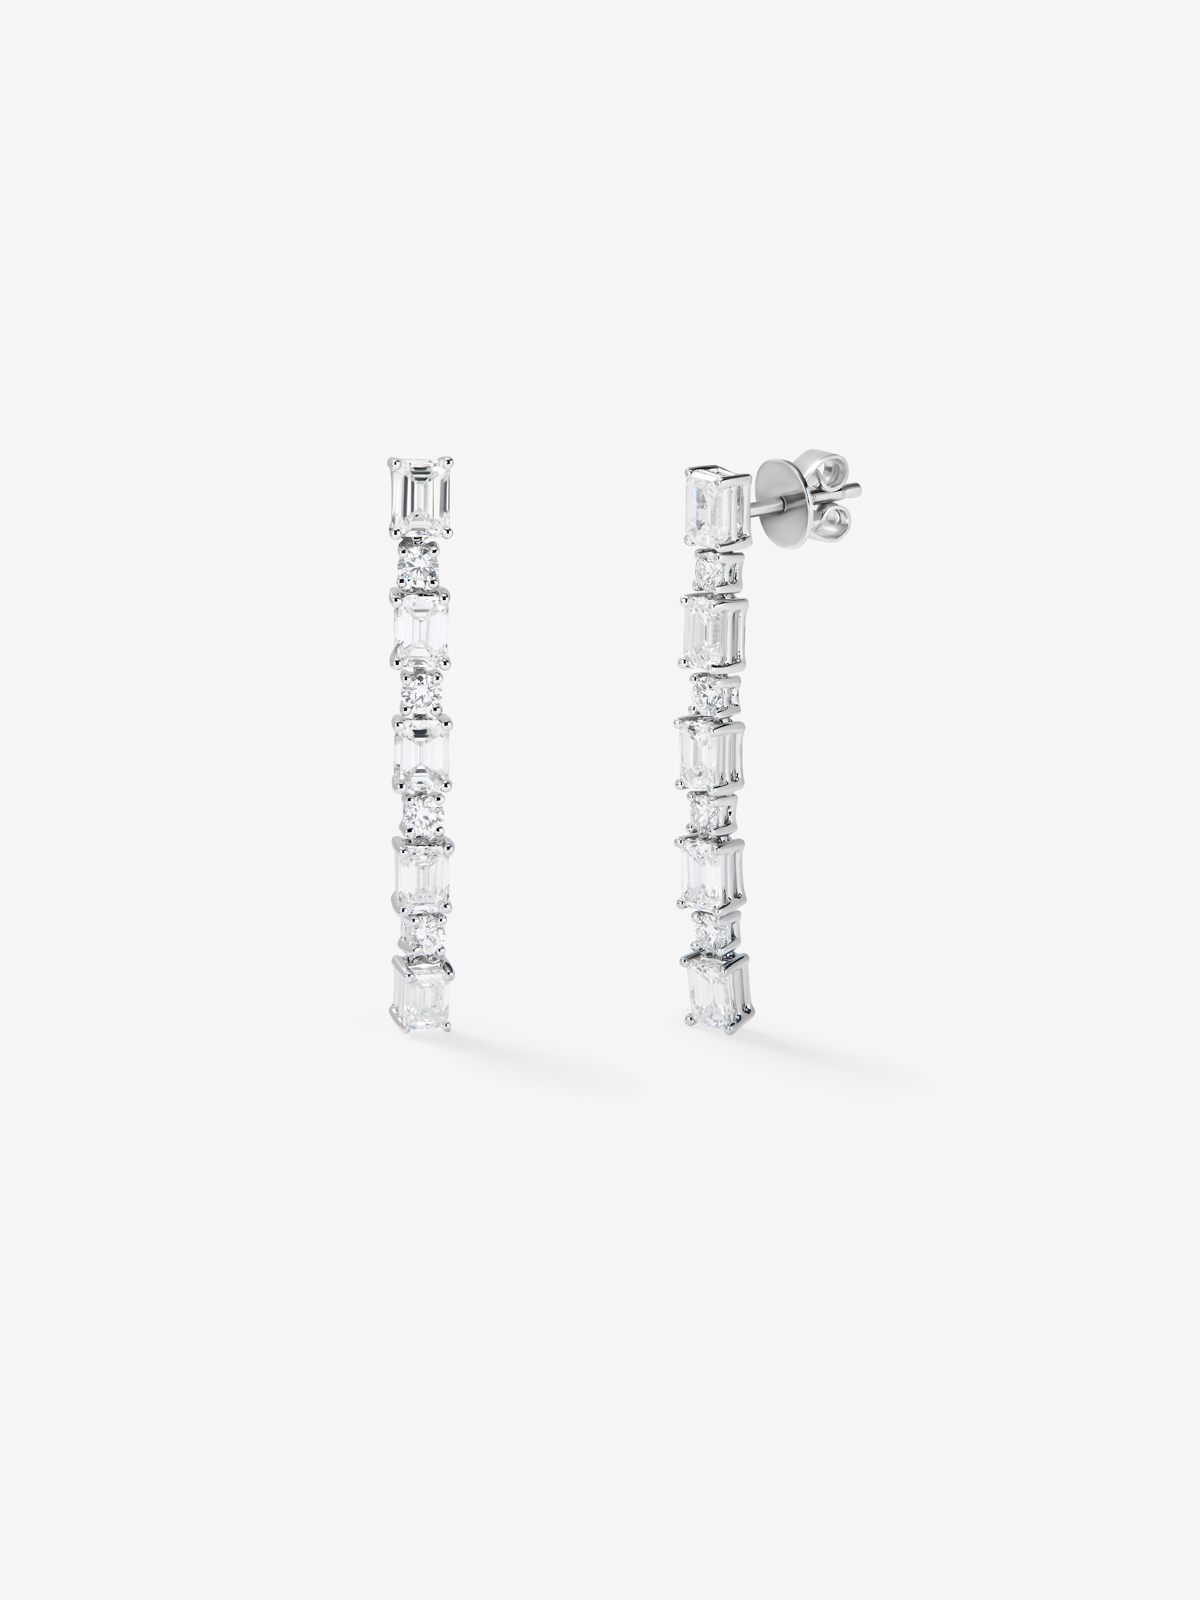 18K white gold earrings with white diamonds in emerald size 3.21 cts and diamonds in bright 0.5 cts